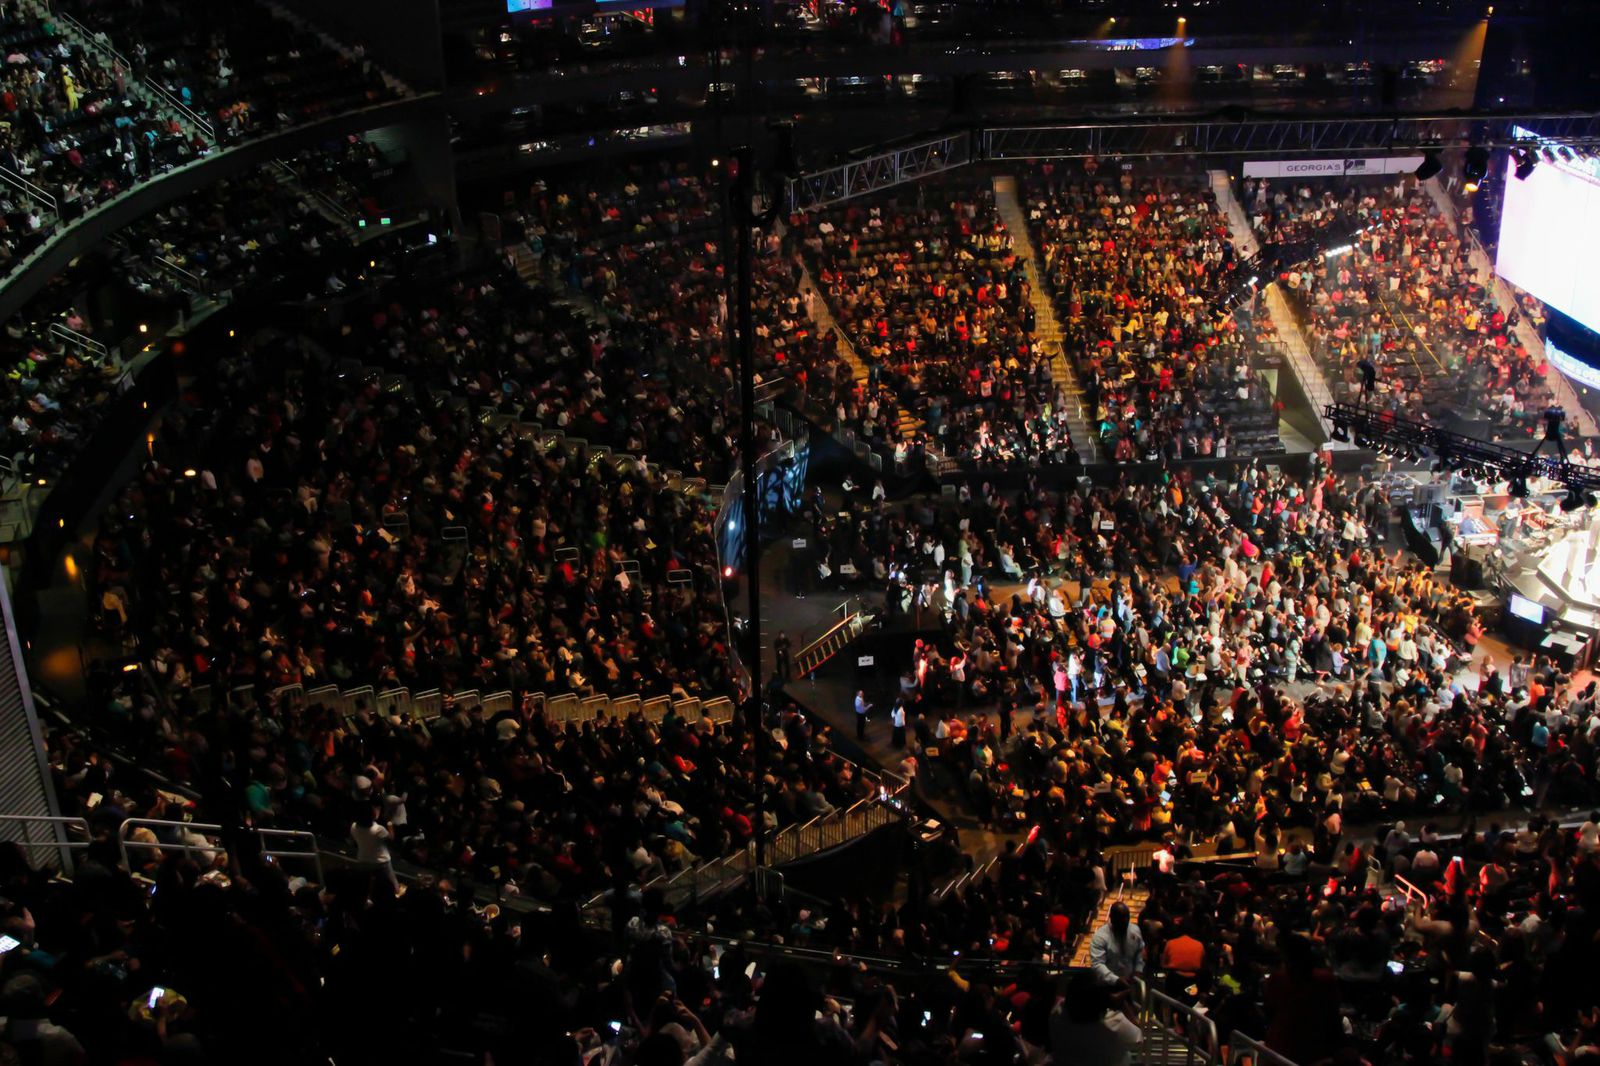 T.D. JAKES AND 20,000+ WOMEN GATHER FOR 2014 “WOMAN